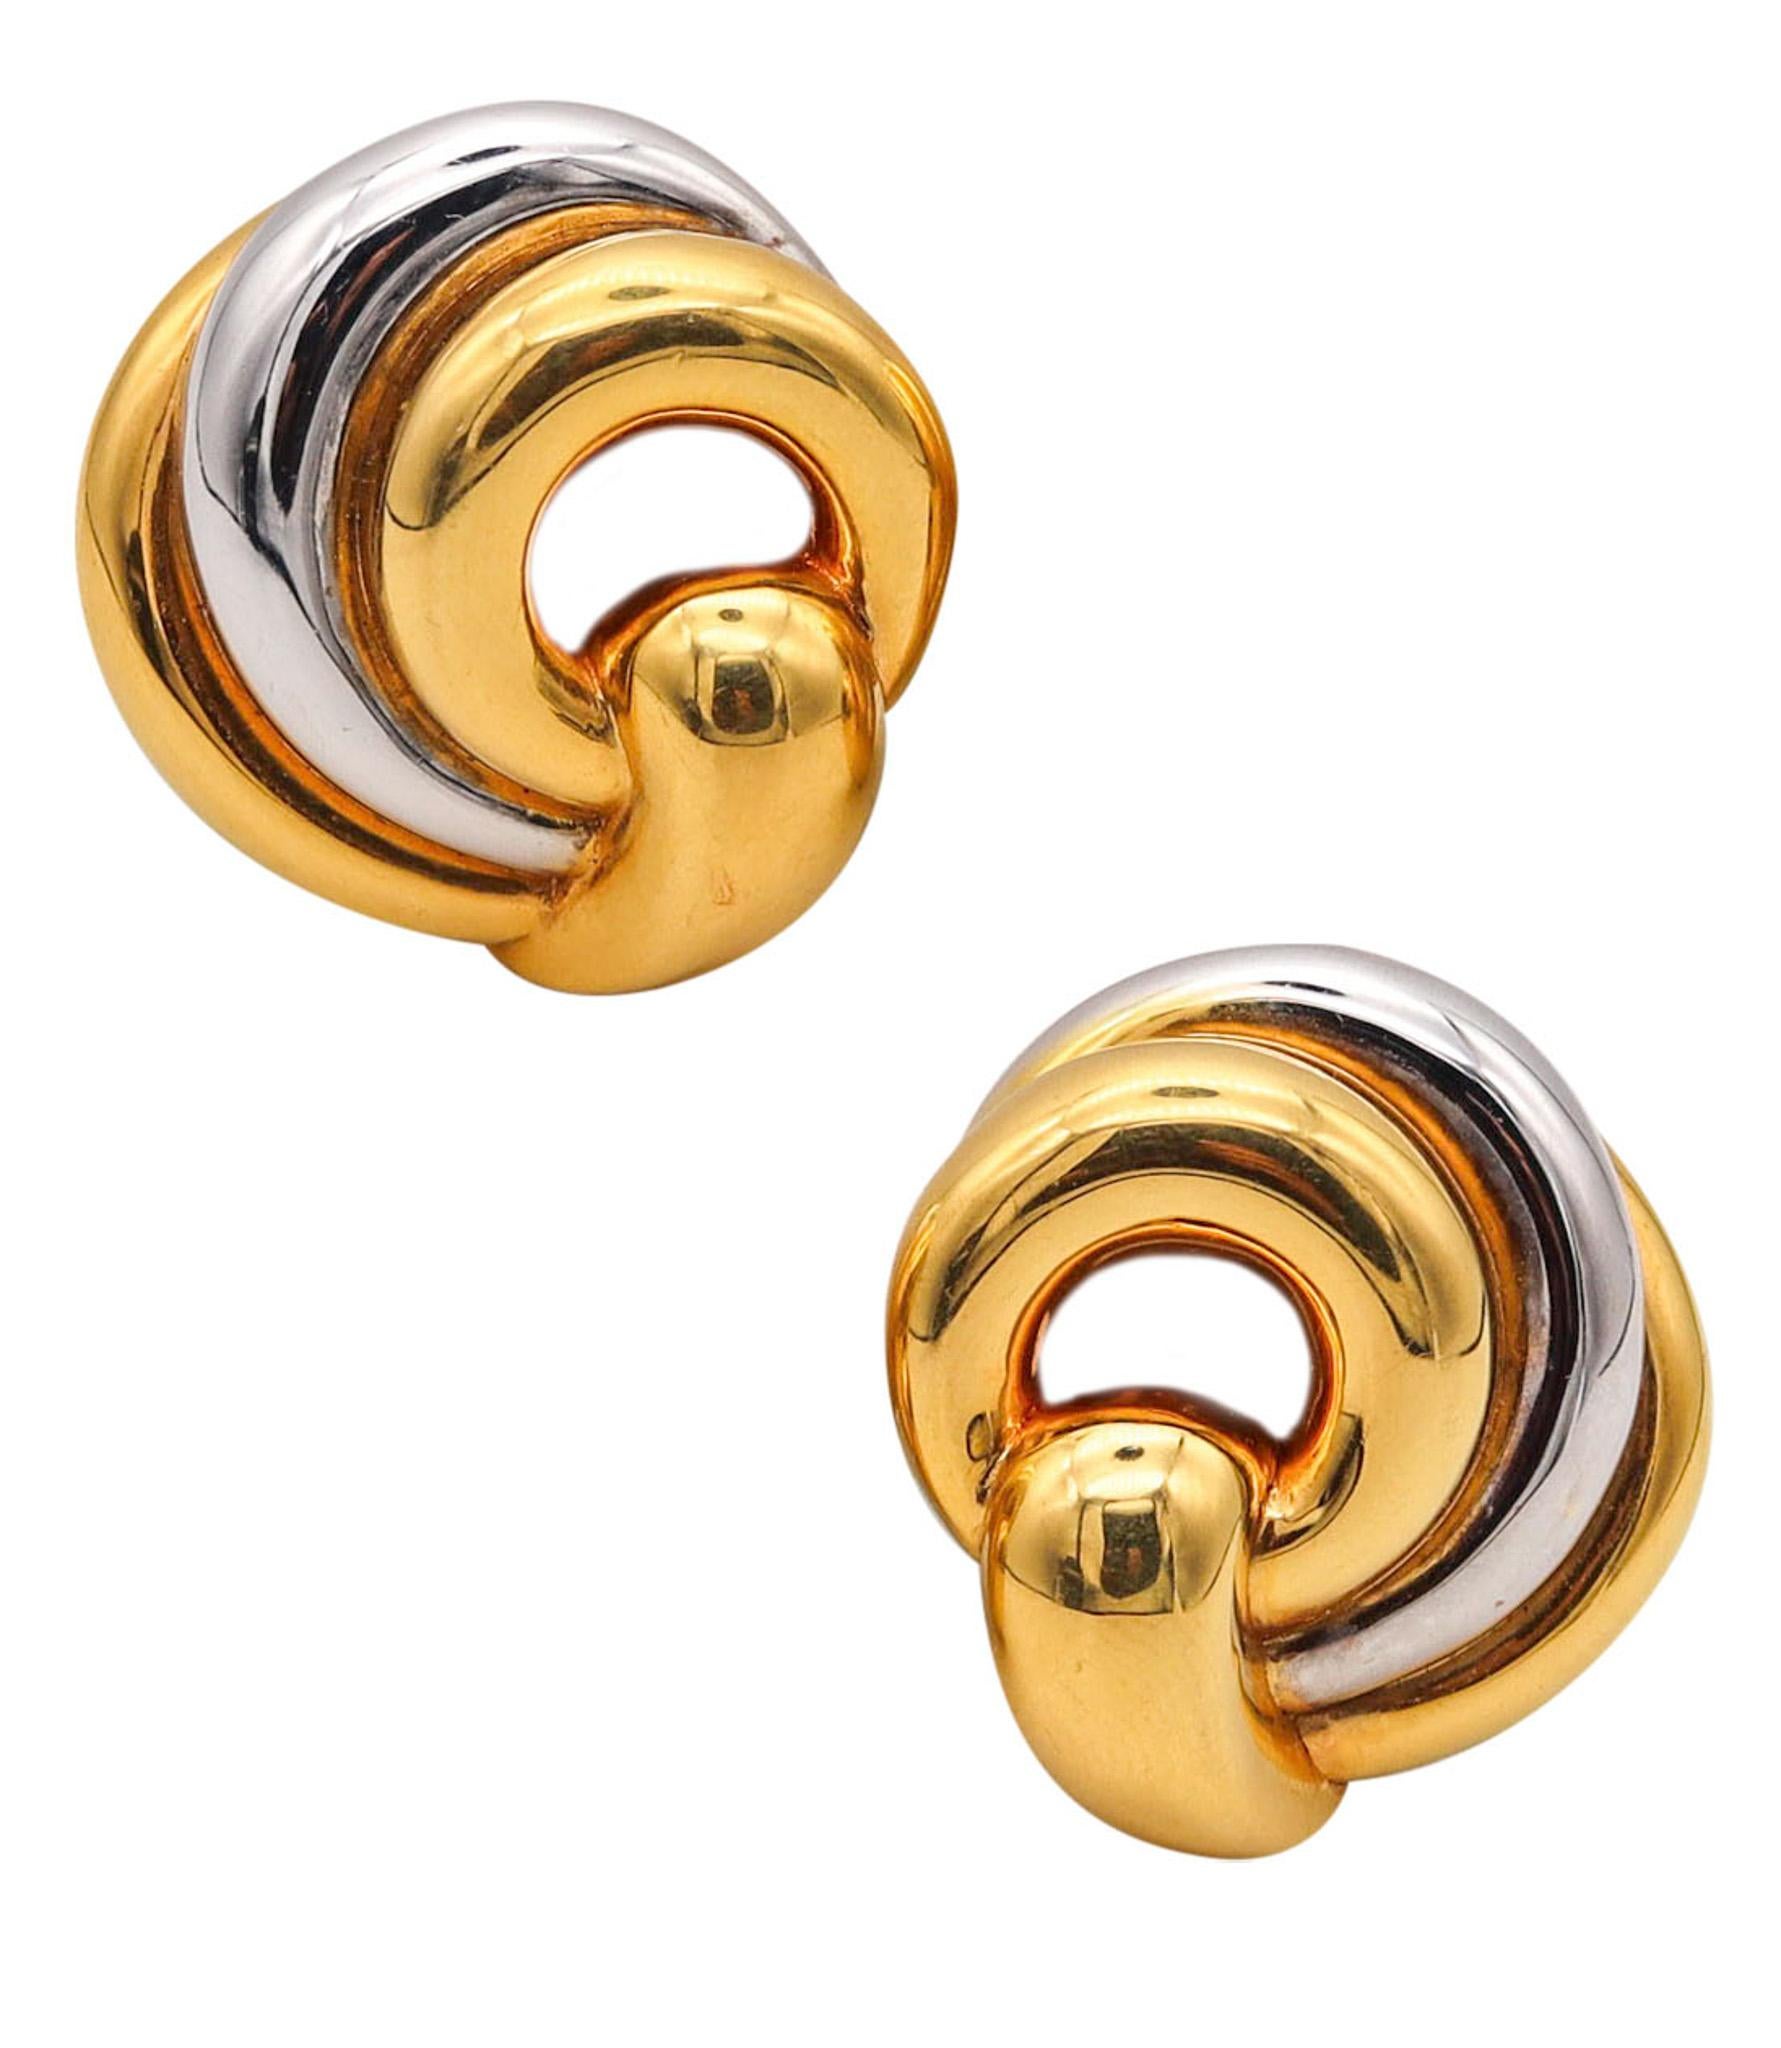 Twisted clips earrings designed by Chaumet.

A vintage pair of earrings, made in Paris France by the jewelry house of Chaumet, back in the late 1970's. These earrings has been crafted as a left and right pairs, with twisted fluted patterns in a